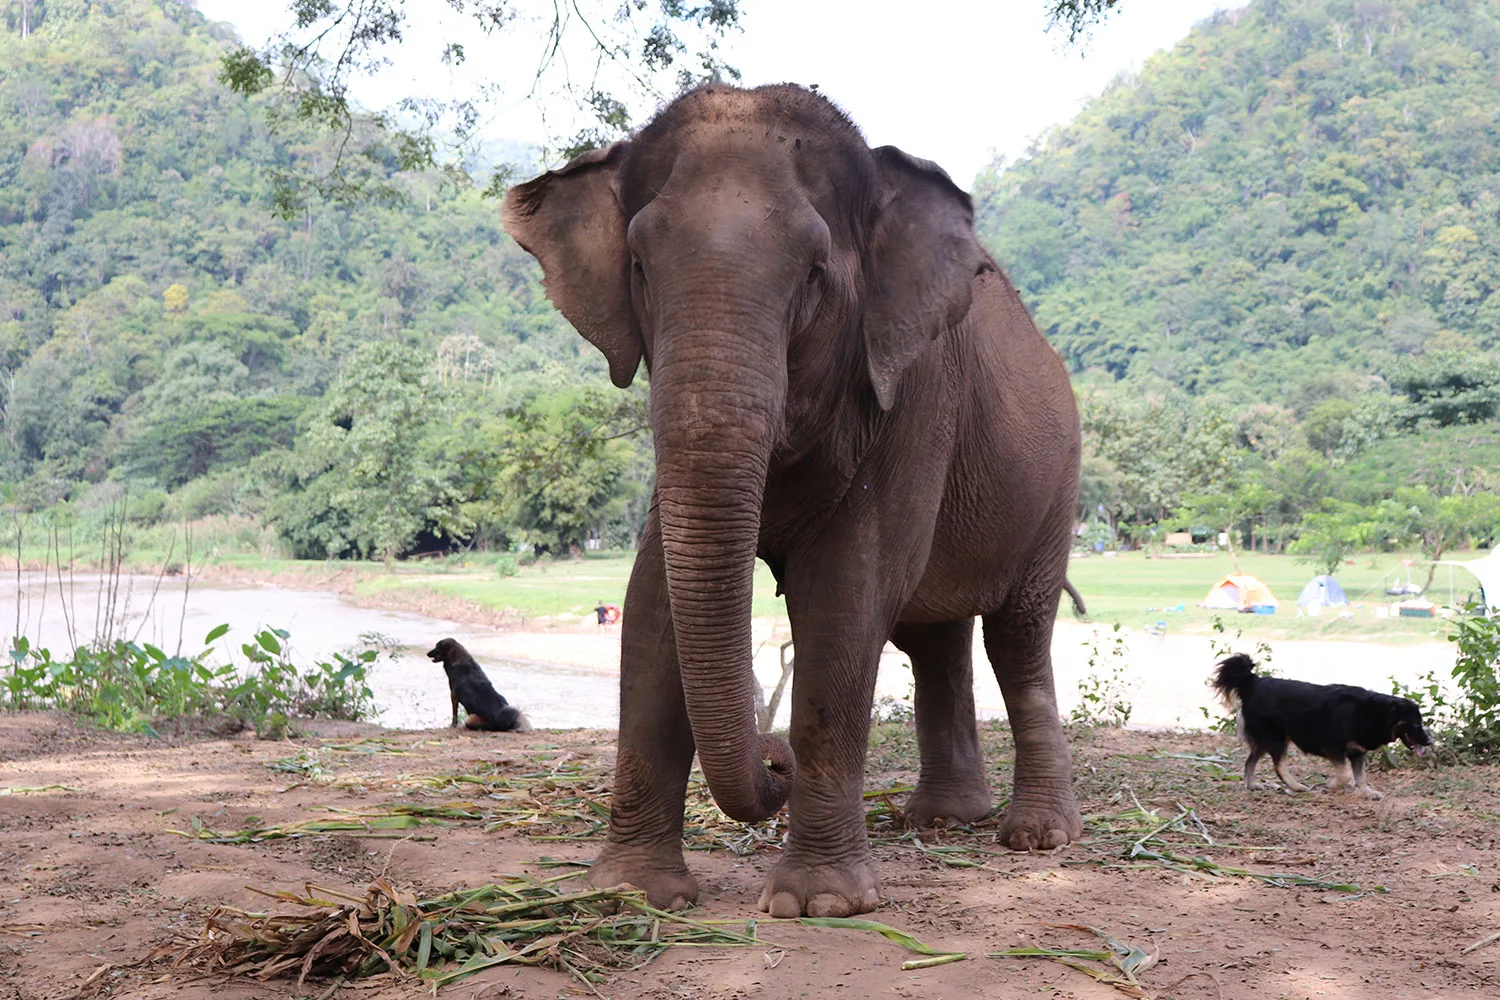 Care for Elephants at Elephant Nature Park